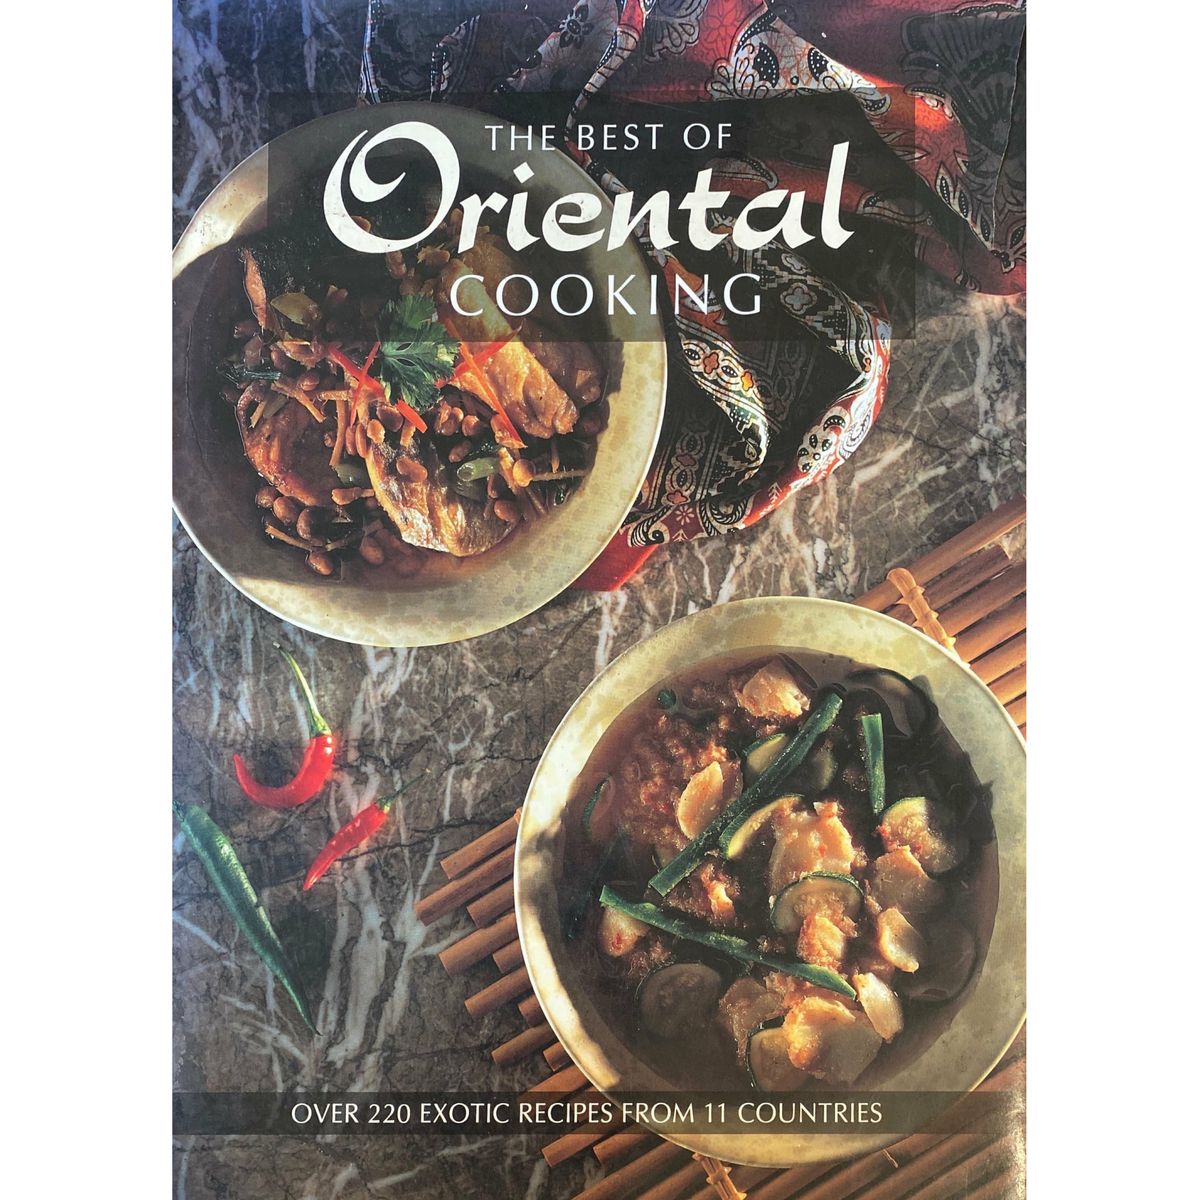 ISBN: 9781851521821 / 1851521828 - The Best of Oriental Cooking by Jeni Wright [1992]